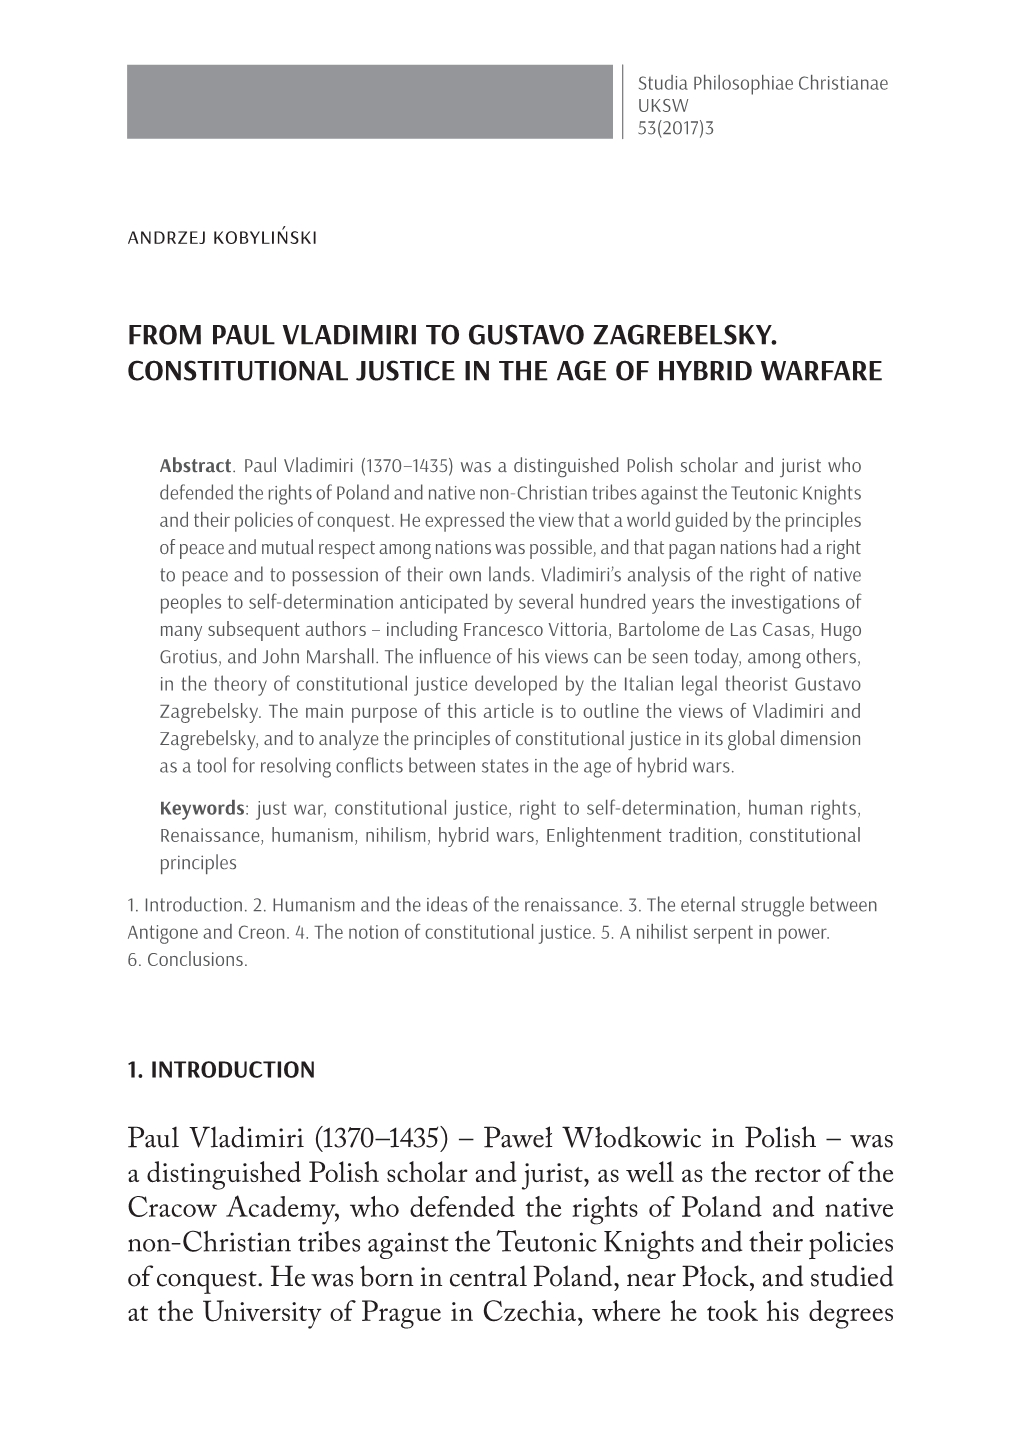 From Paul Vladimiri to Gustavo Zagrebelsky. Constitutional Justice in the Age of Hybrid Warfare